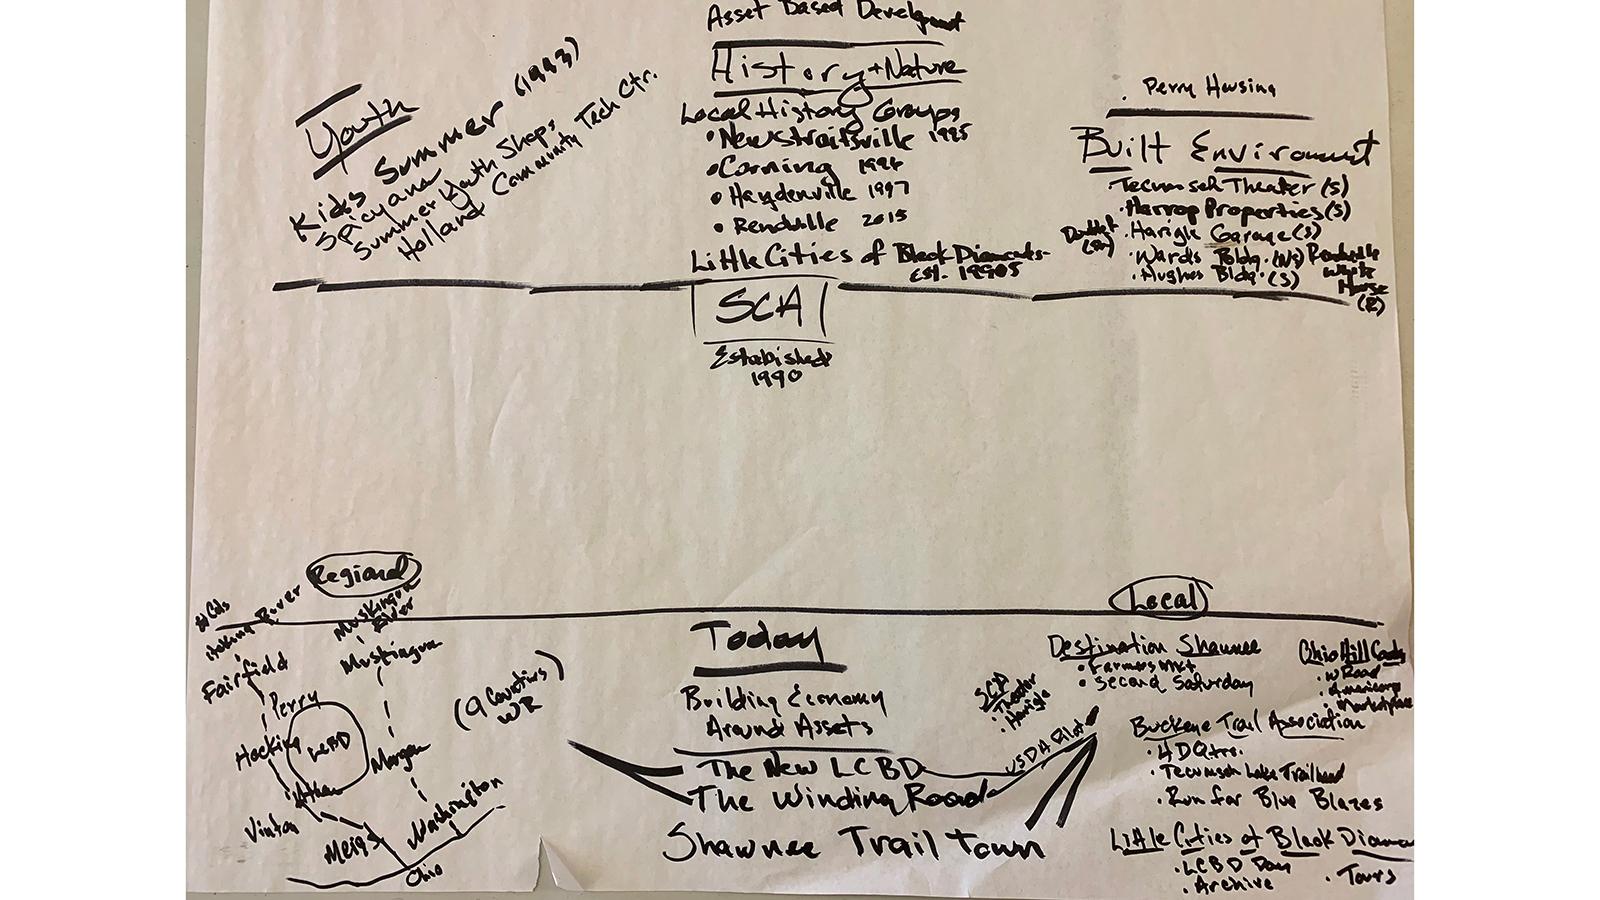 A concept map of SCA's community efforts over the years produced by John Winnenberg.